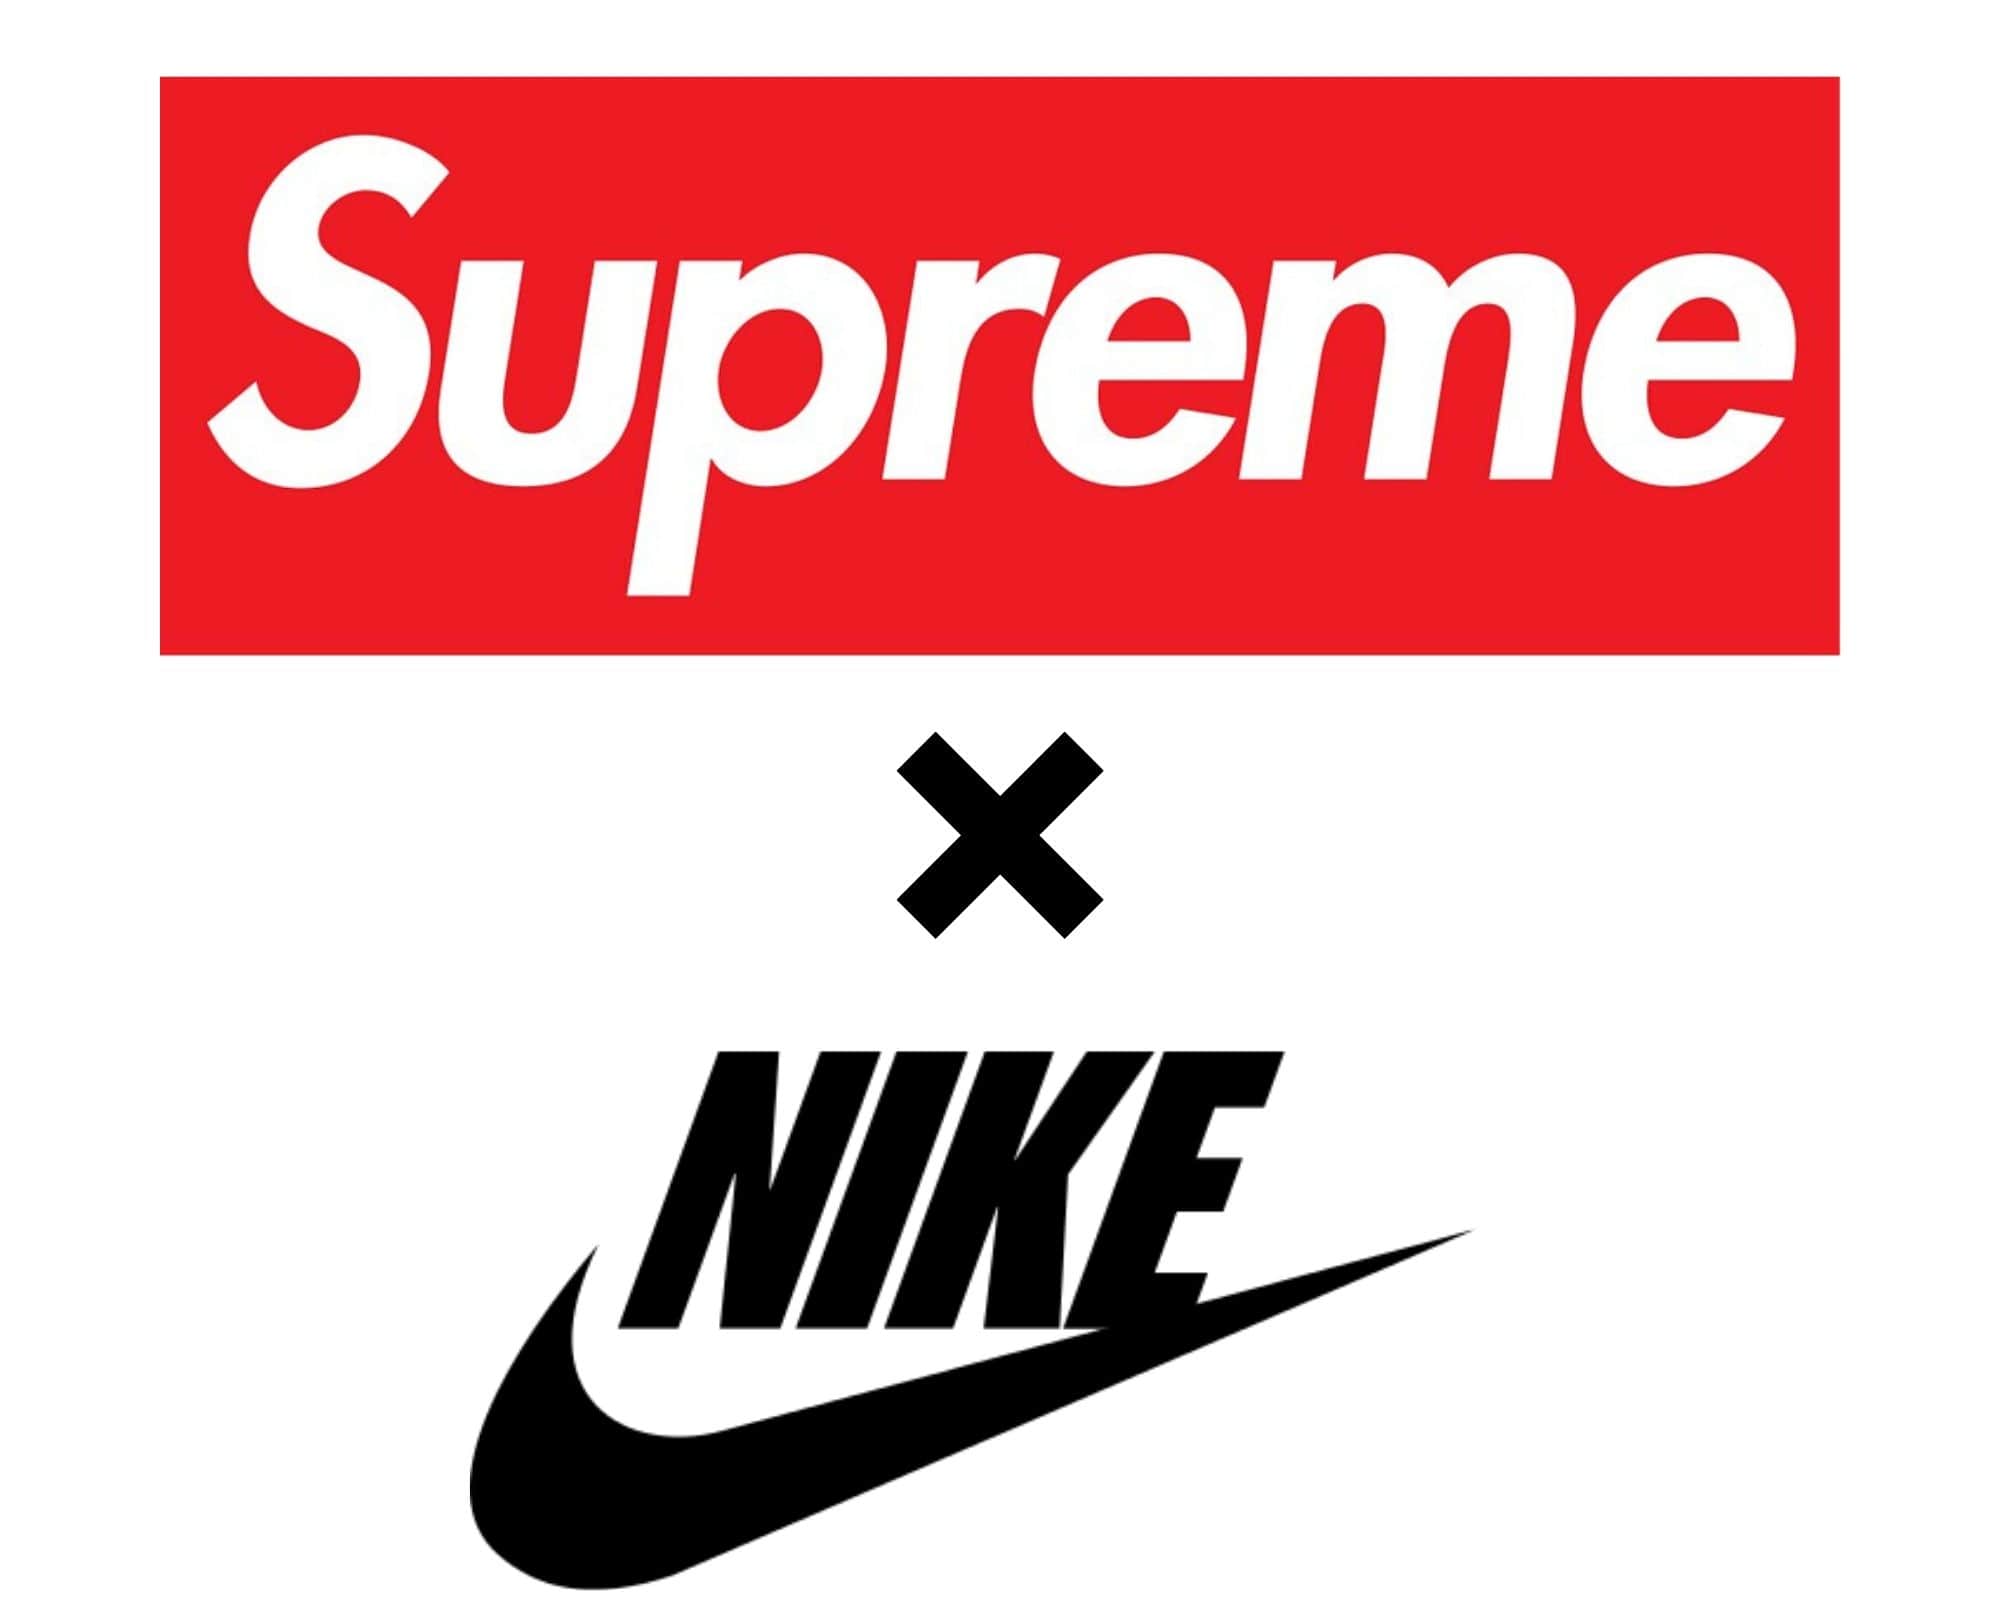 Supreme Nike Collab Is The Star of This Week's Droplist!